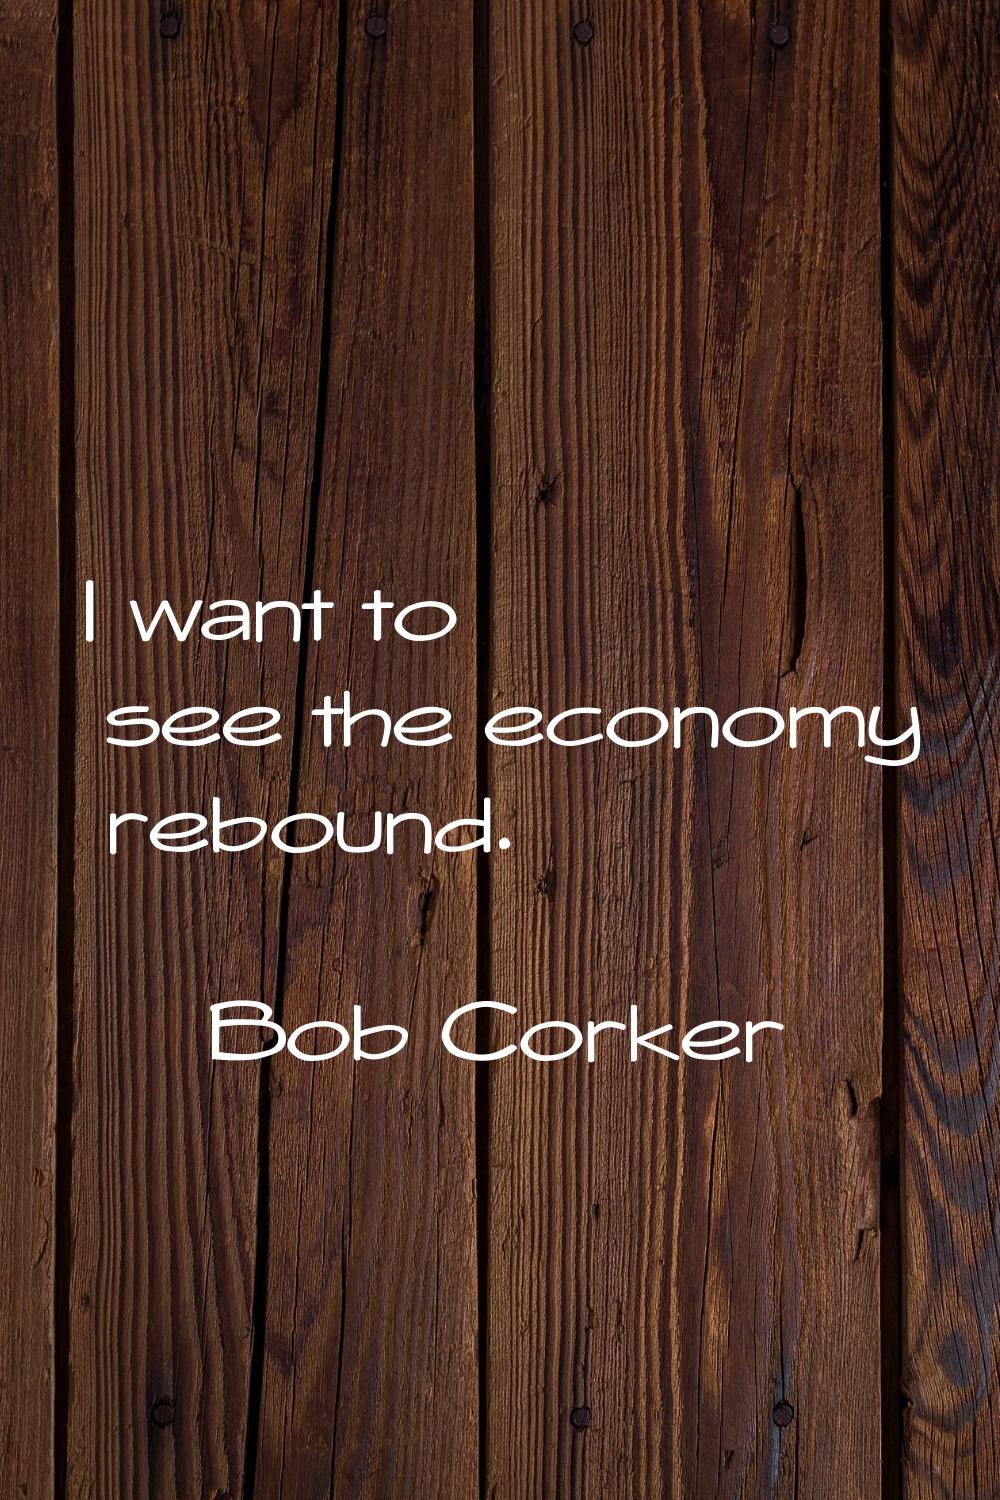 I want to see the economy rebound.